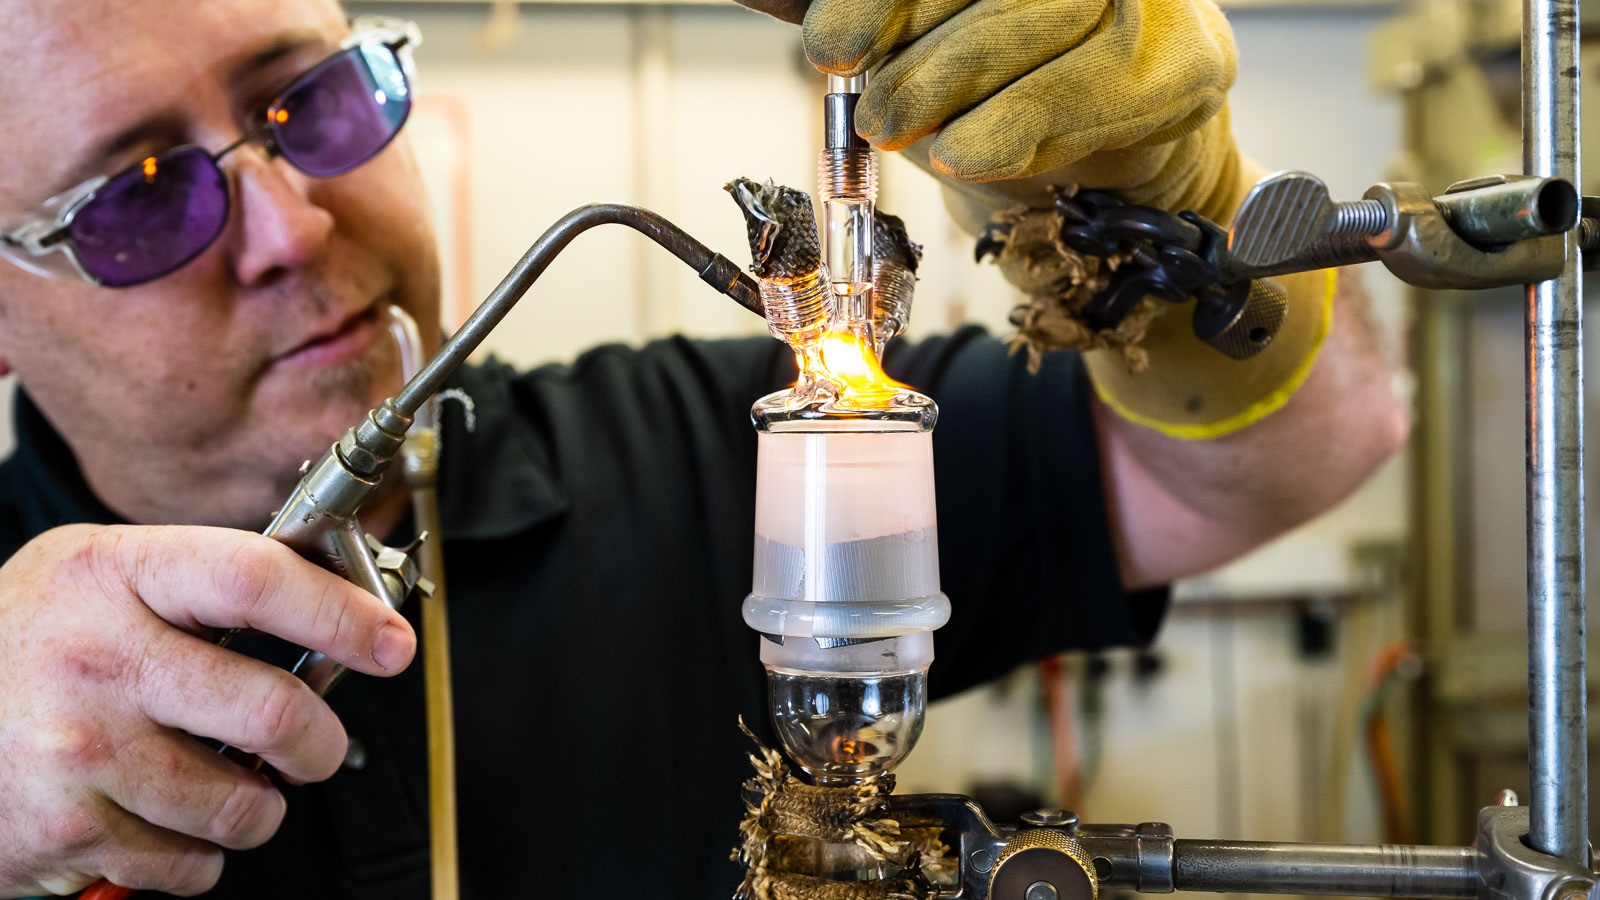 Man applying flame to glass item. (Image by Argonne National Laboratory.)